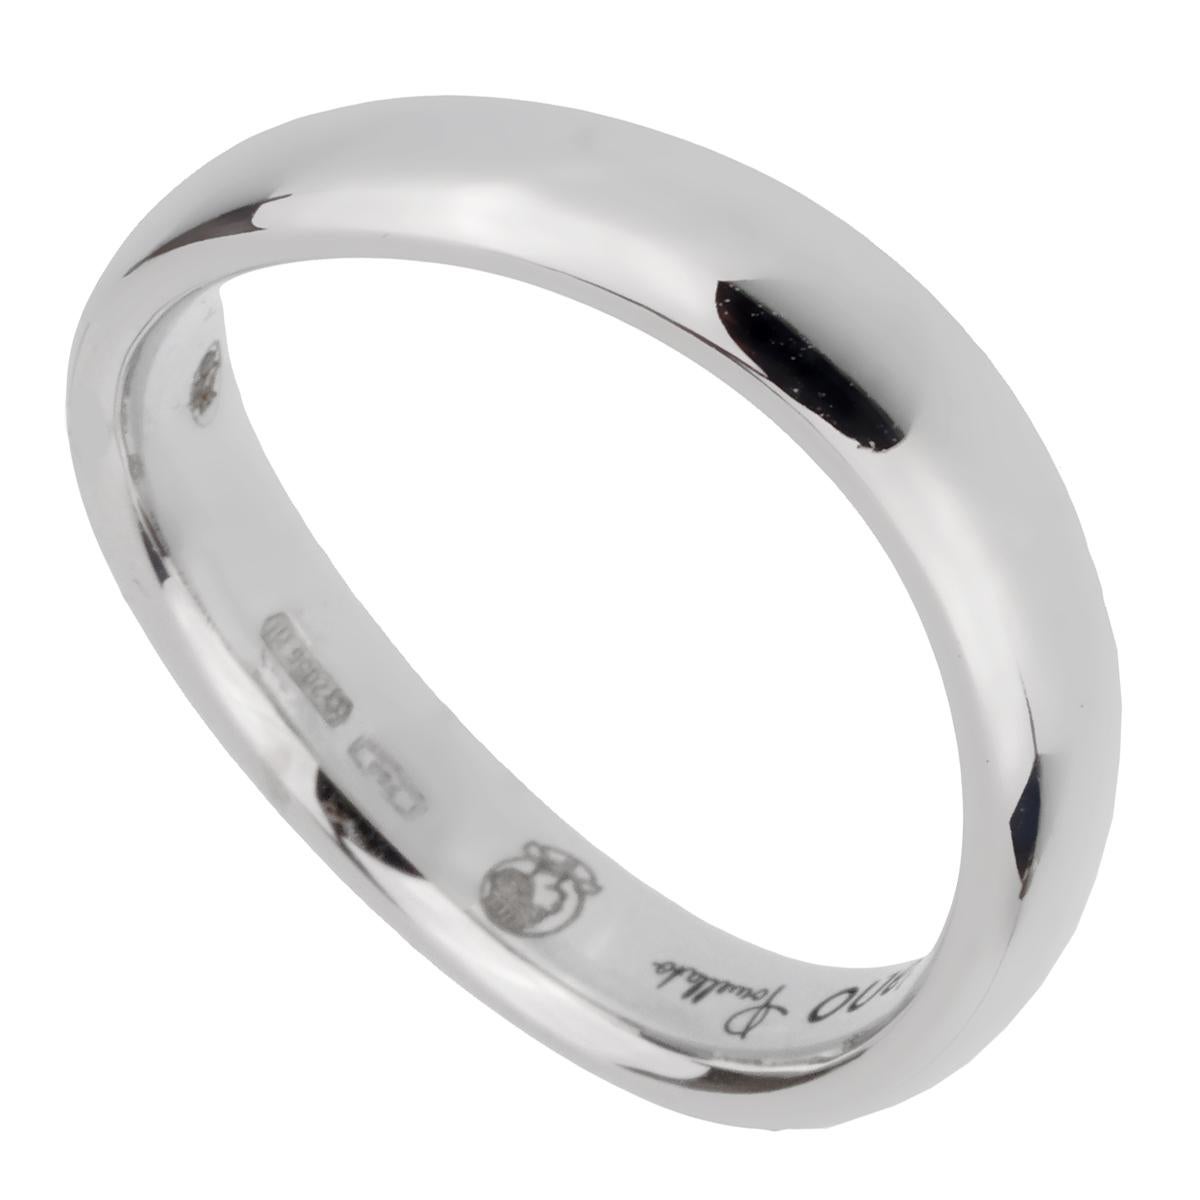 A chic Pomellato wave style band crafted in 18k white gold, the ring measures a size 5 and can be resized.

Pomellato Retail Price: $1350
Sku: 2401